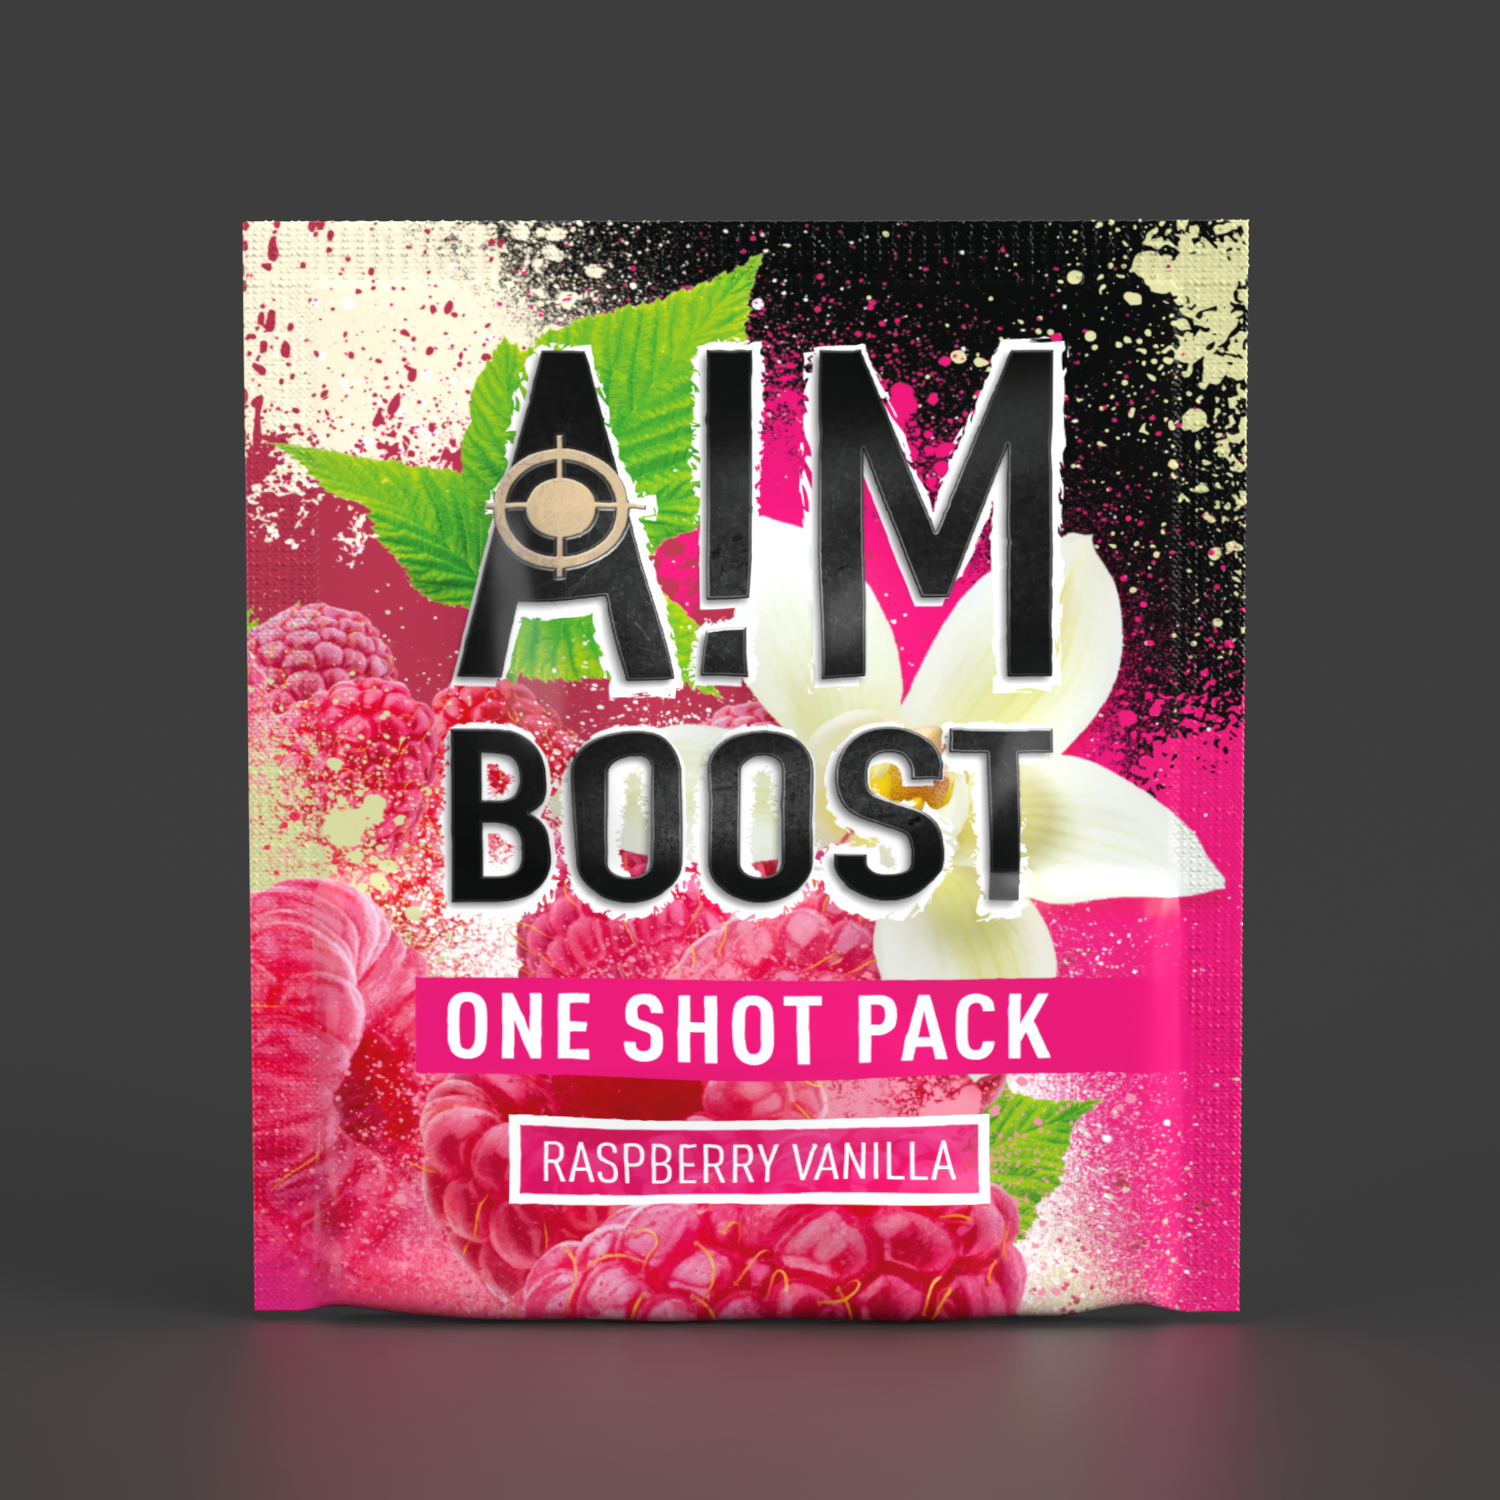 ONE SHOT PACK